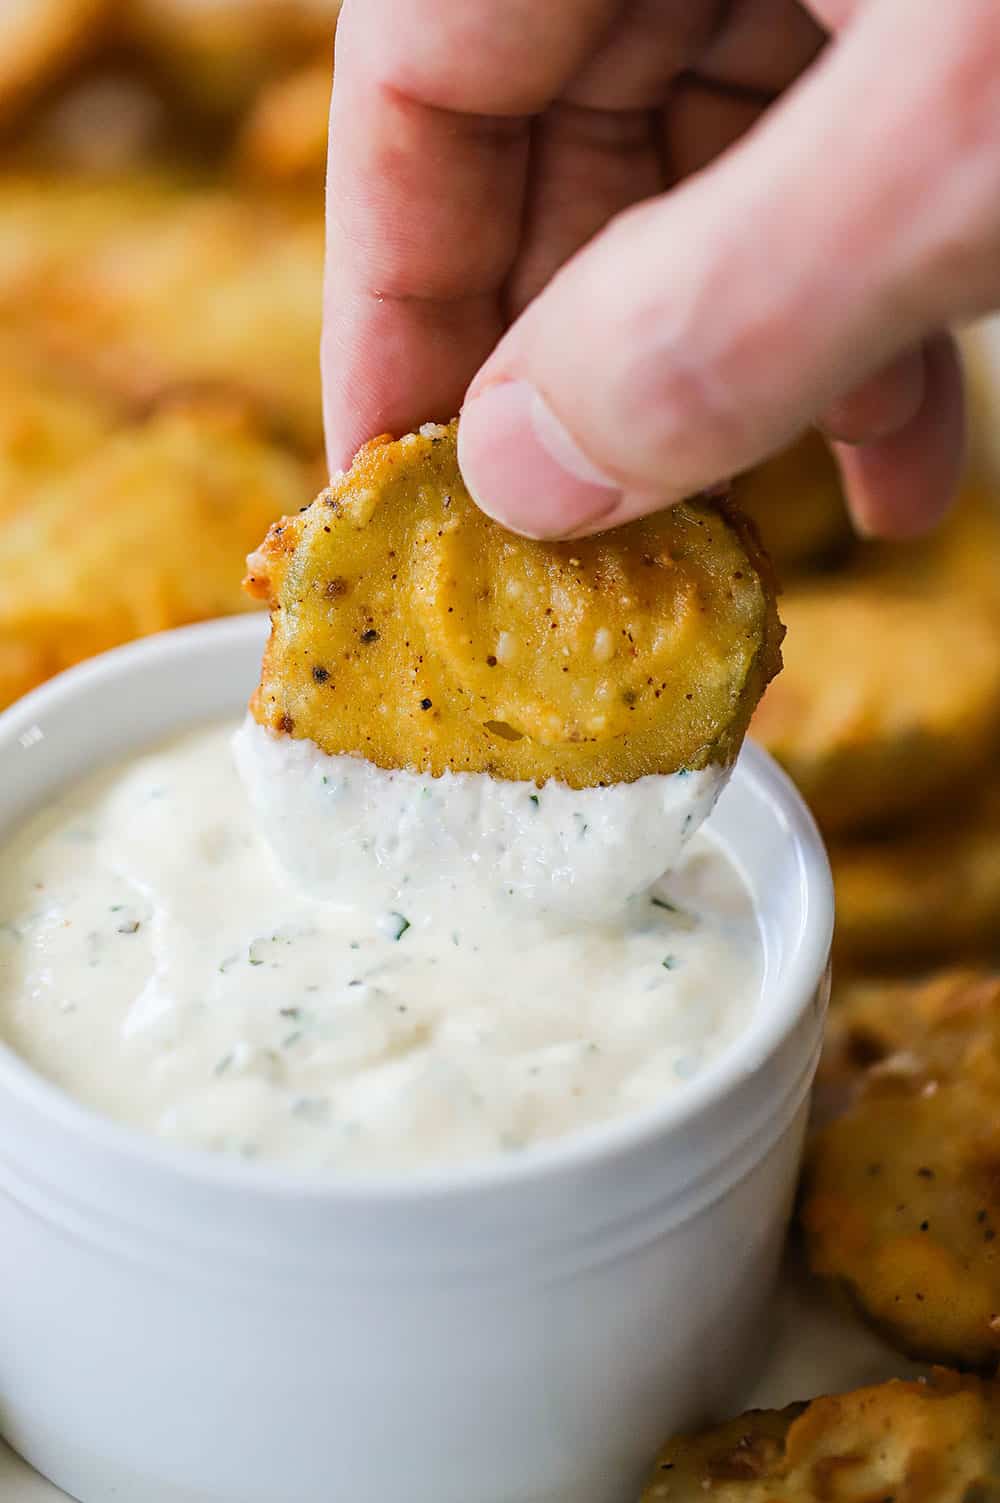 A person dipping a fried pickle into a small bowl filled with Ranch dressing.